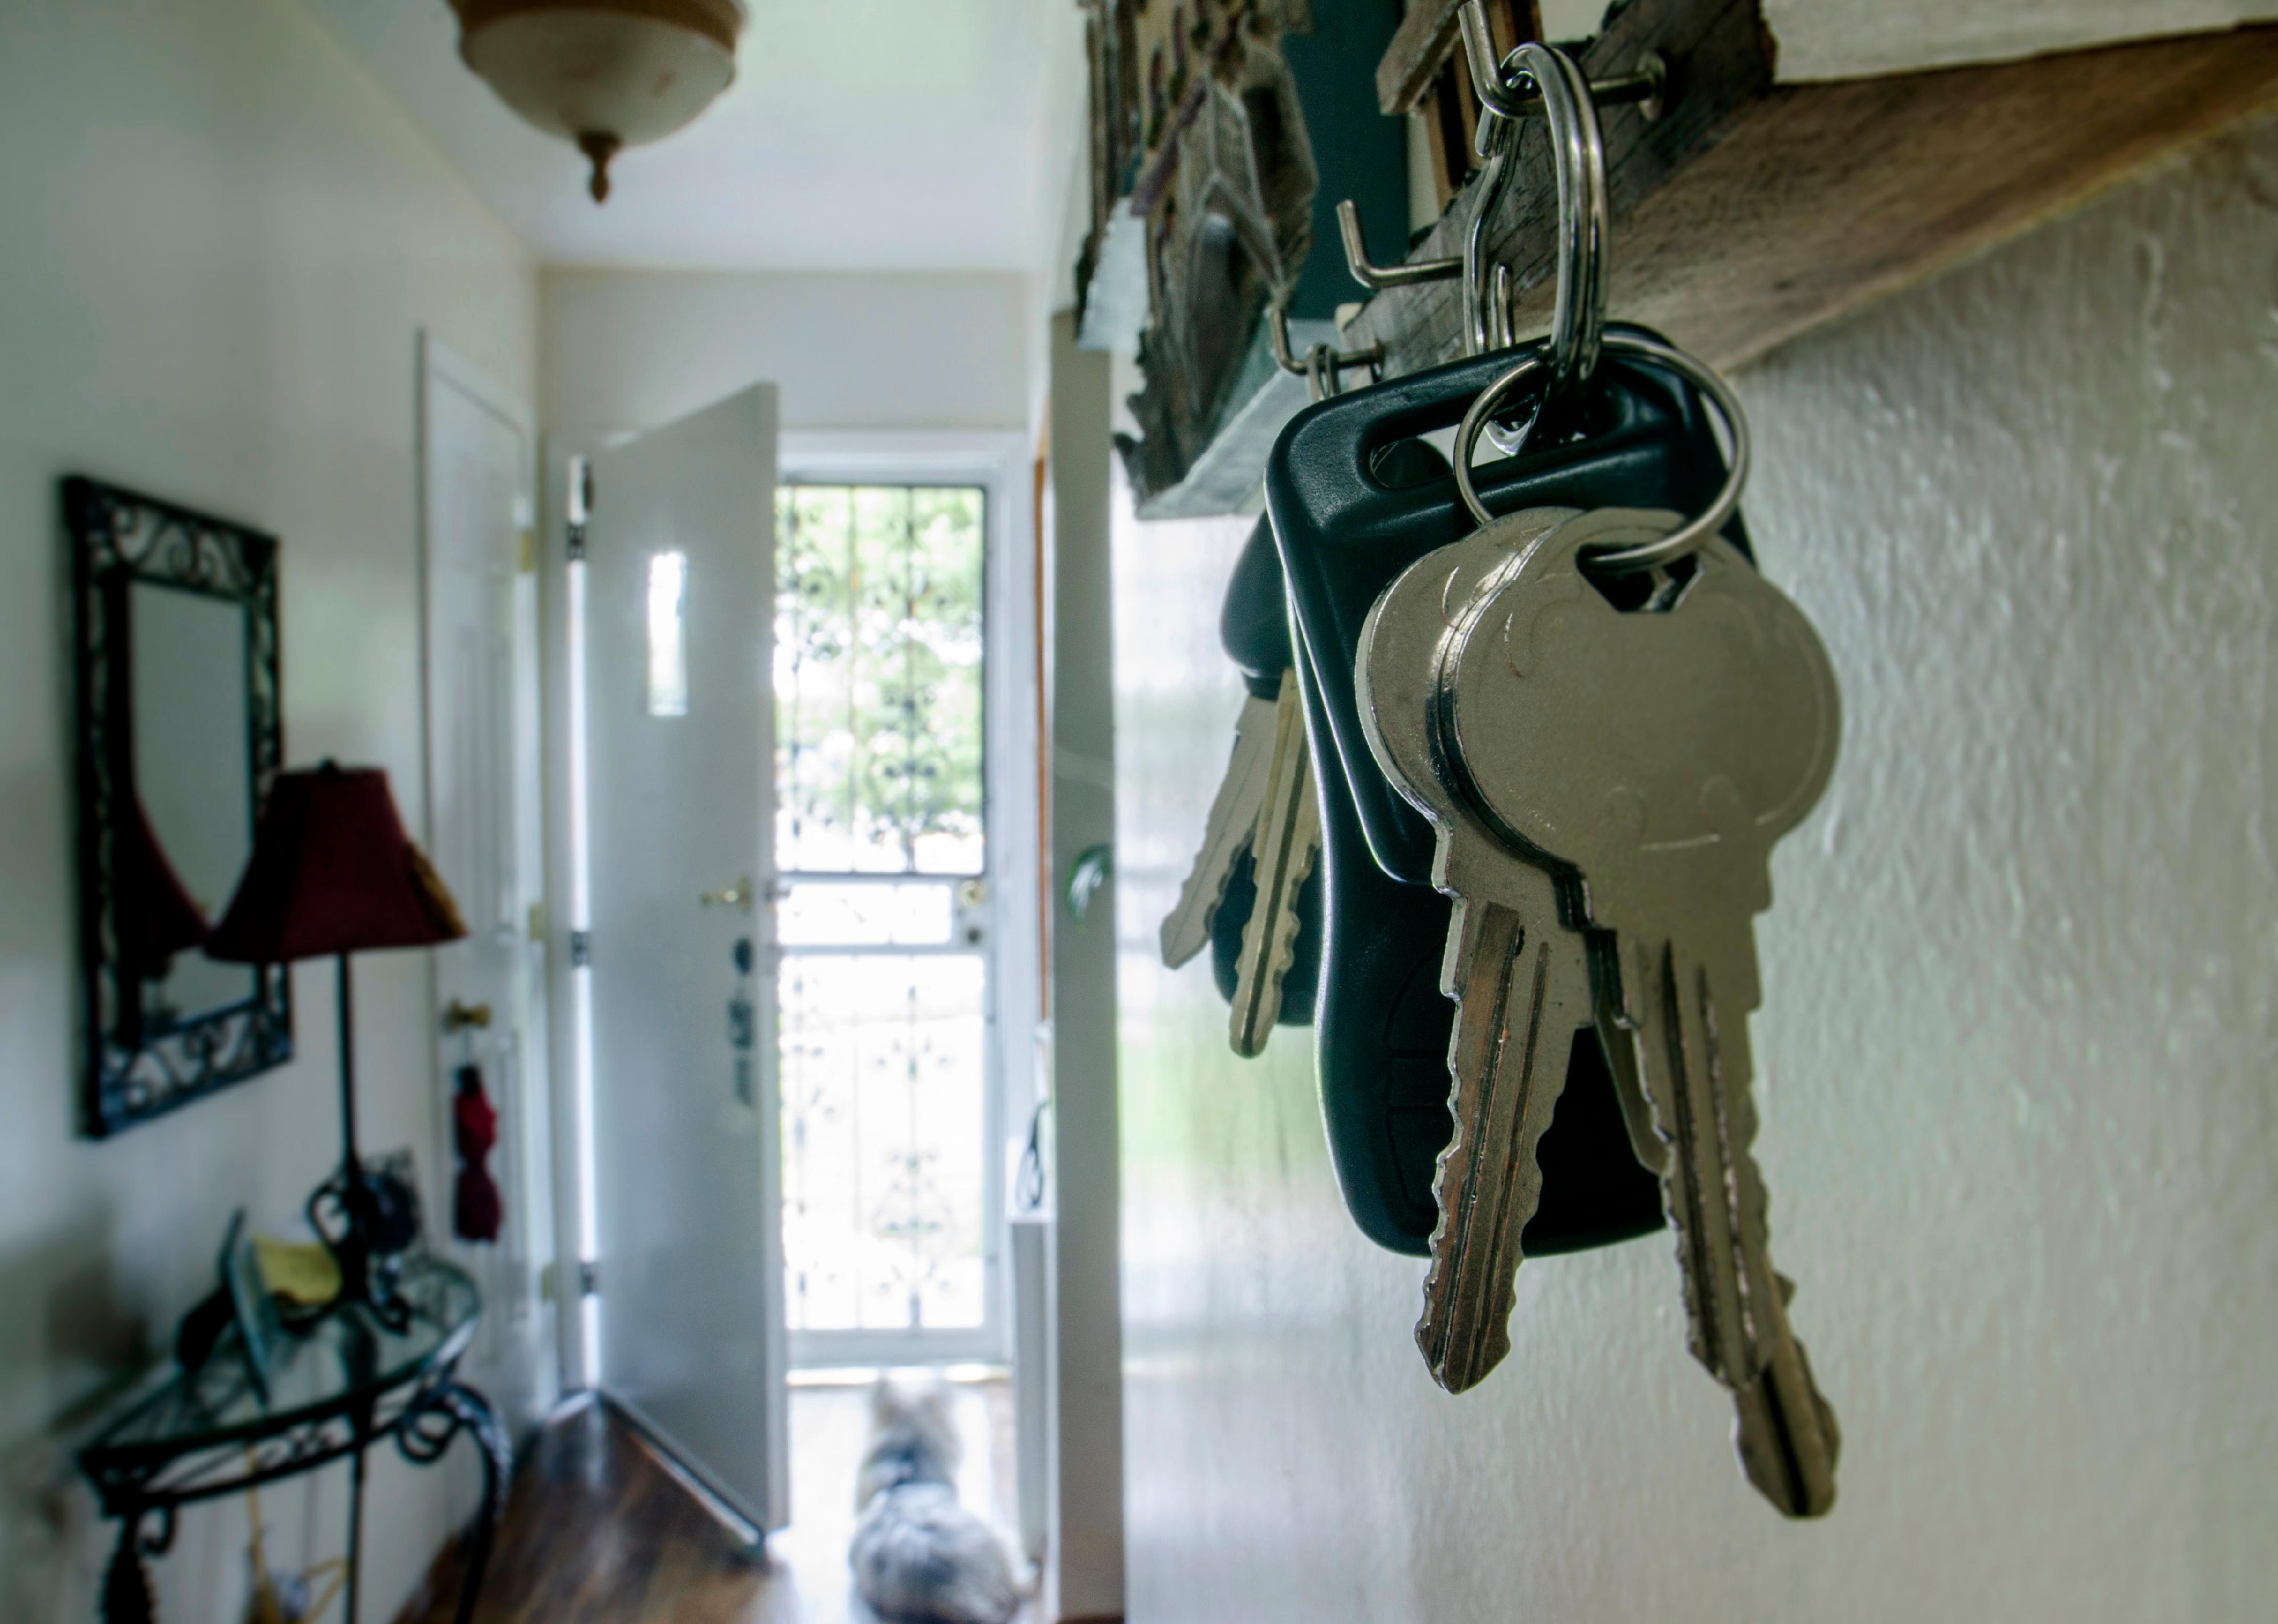 Keychain on key hook with front door in background.